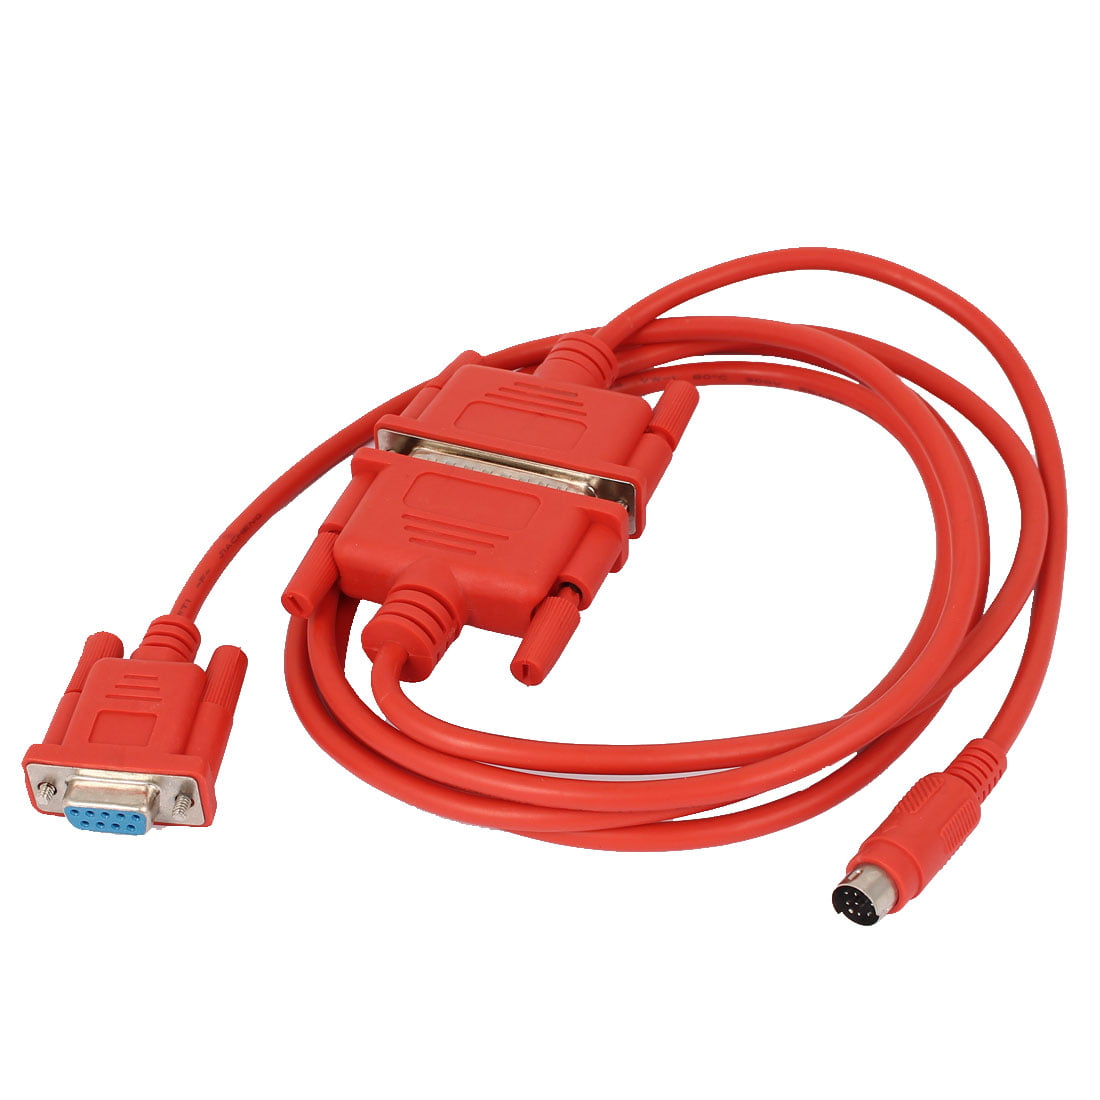 SC-09 SC09 PLC Programming Cable for Mitsubishi MELSEC FX&A Series RS422 Adapter 